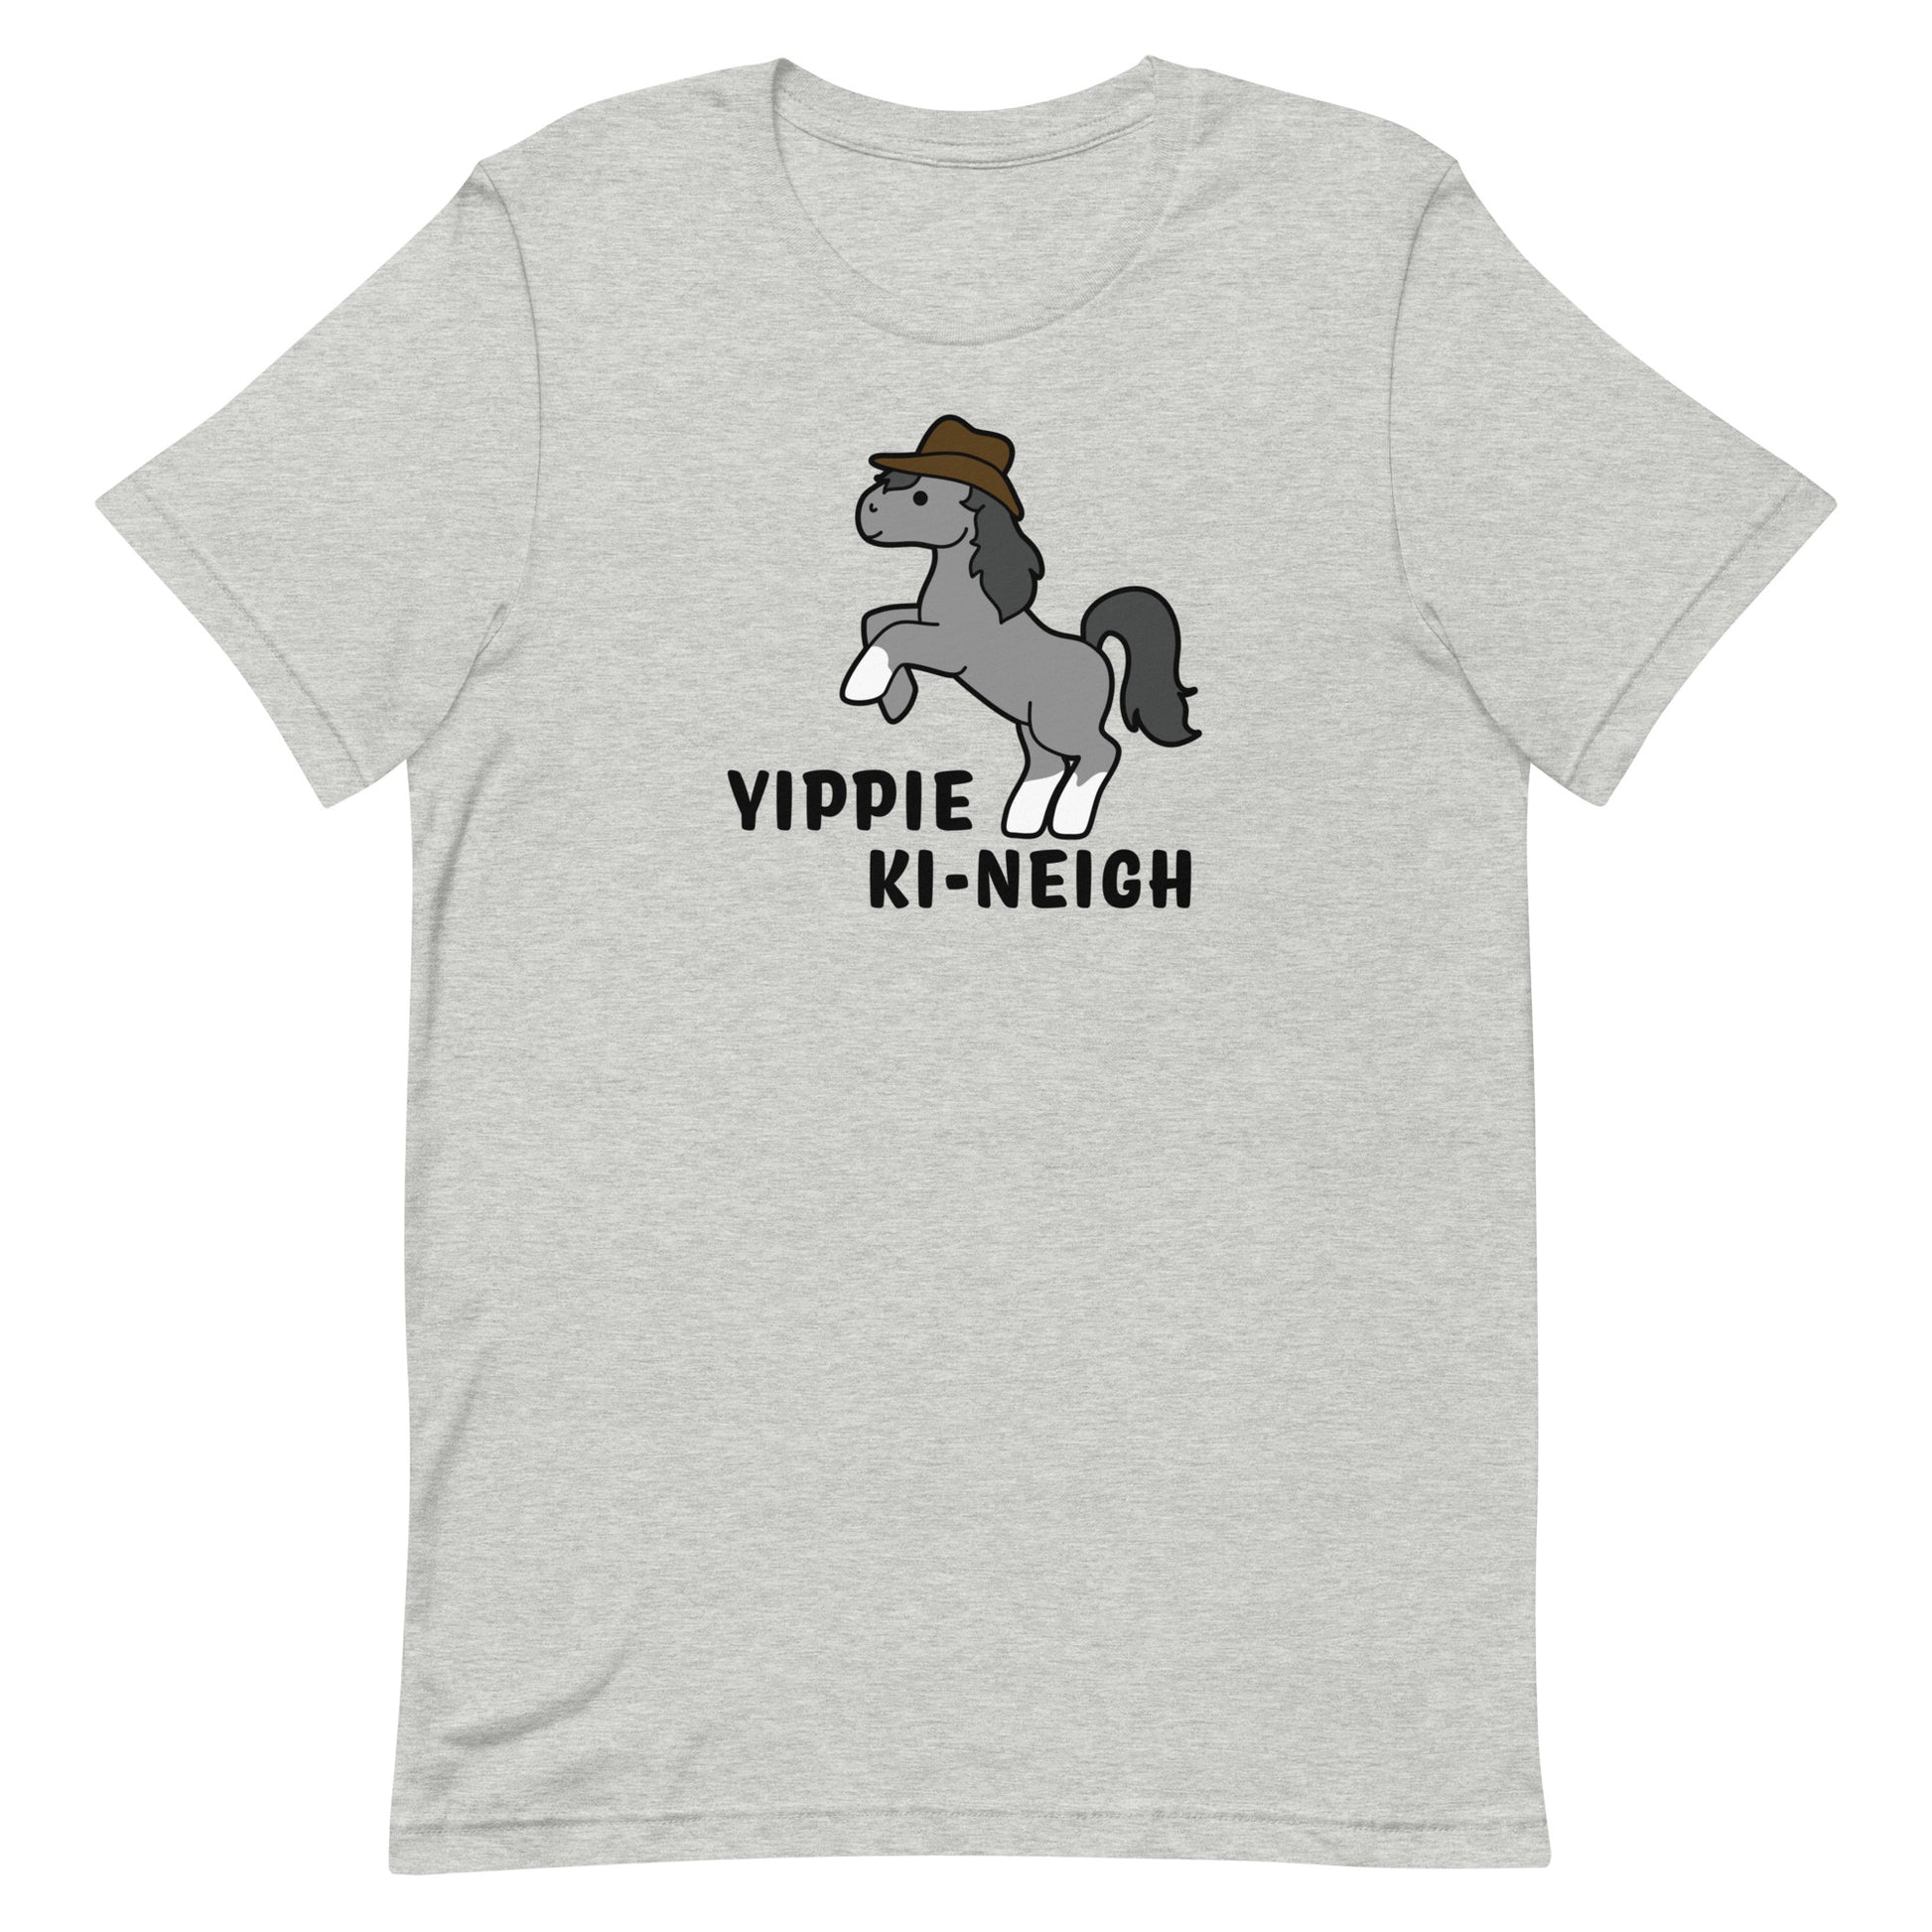 A grey crewneck t-shirt featuring an illustration of a smiling grey pony rearing and wearing a cowboy hat. Text underneath the pony reads "Yippie Ki-Neigh"